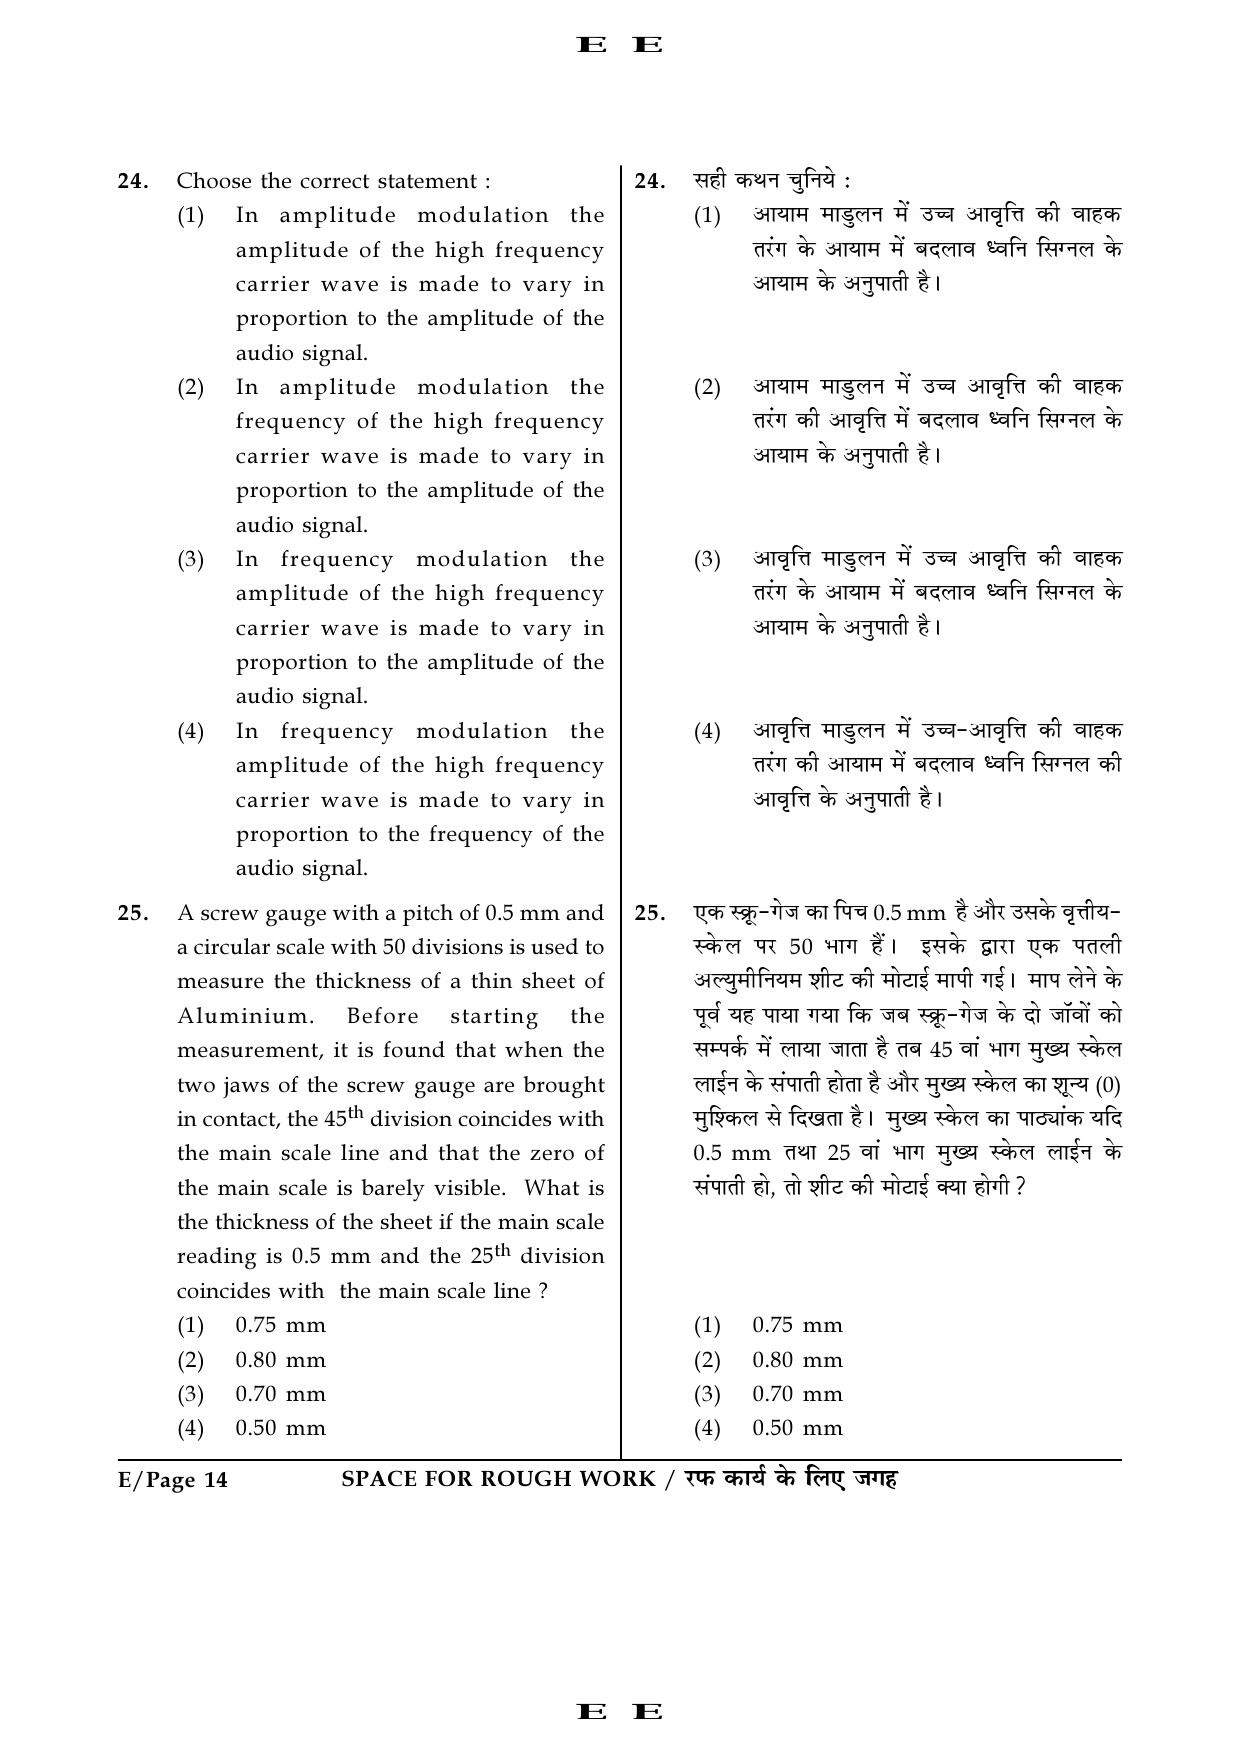 JEE Main Exam Question Paper 2016 Booklet E 14